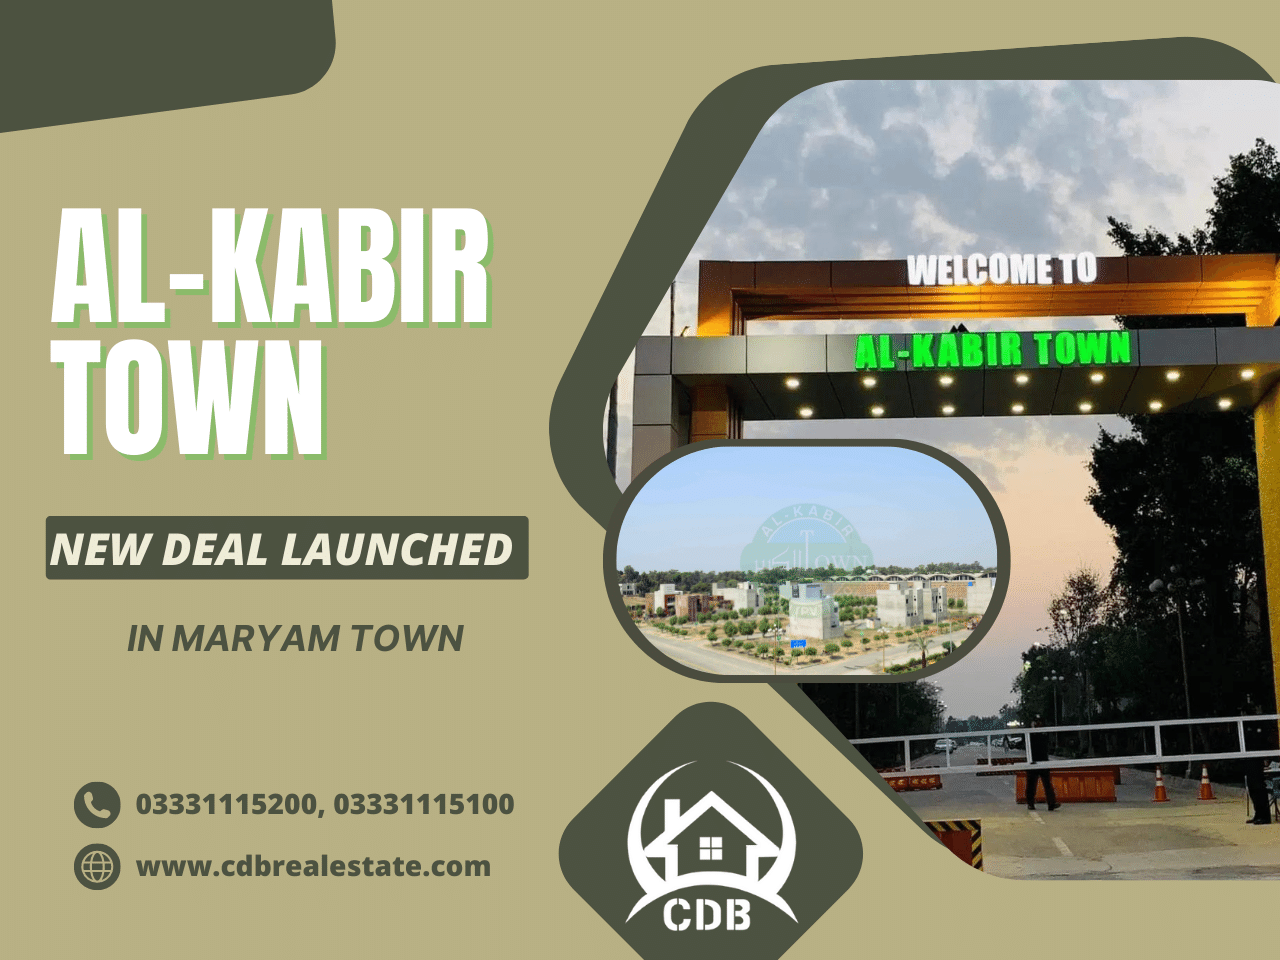 AL-Kabir Town Launched A New Deal In Maryam Town